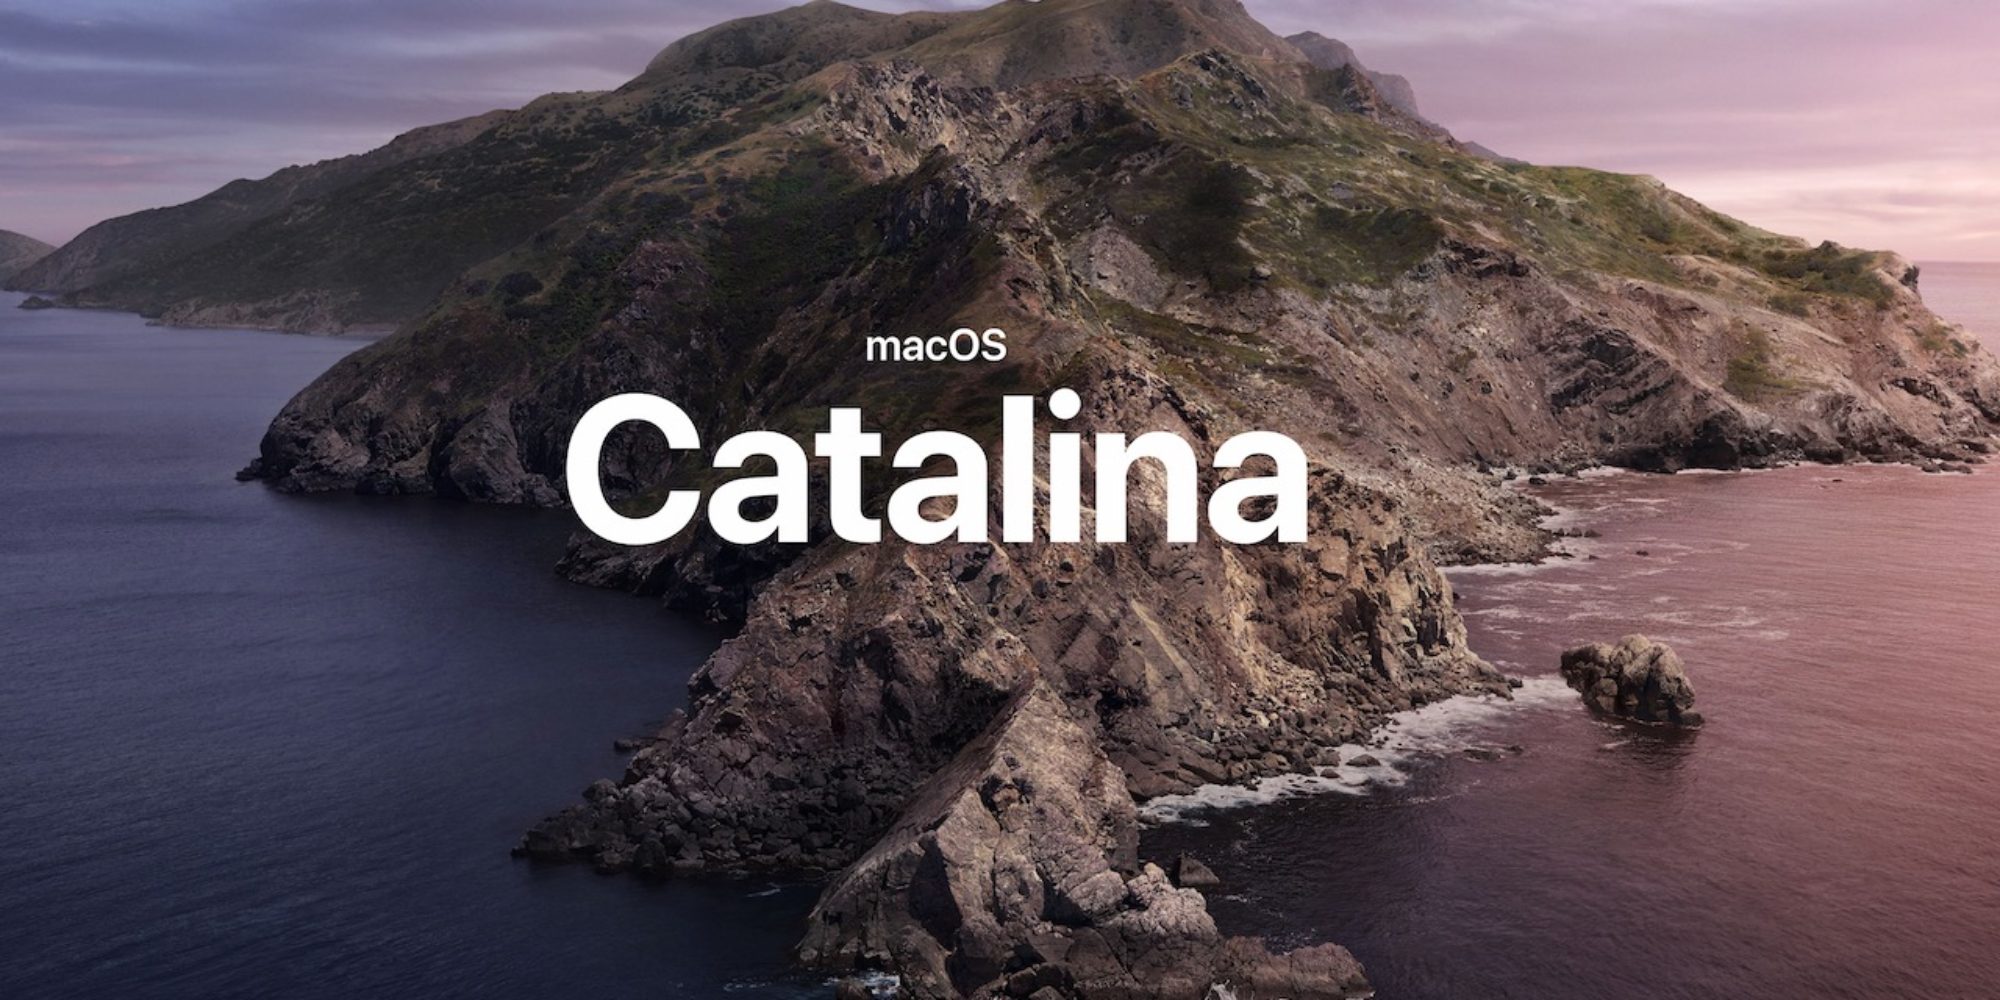 Some of Our Favorite Features of macOS 10.15 Catalina